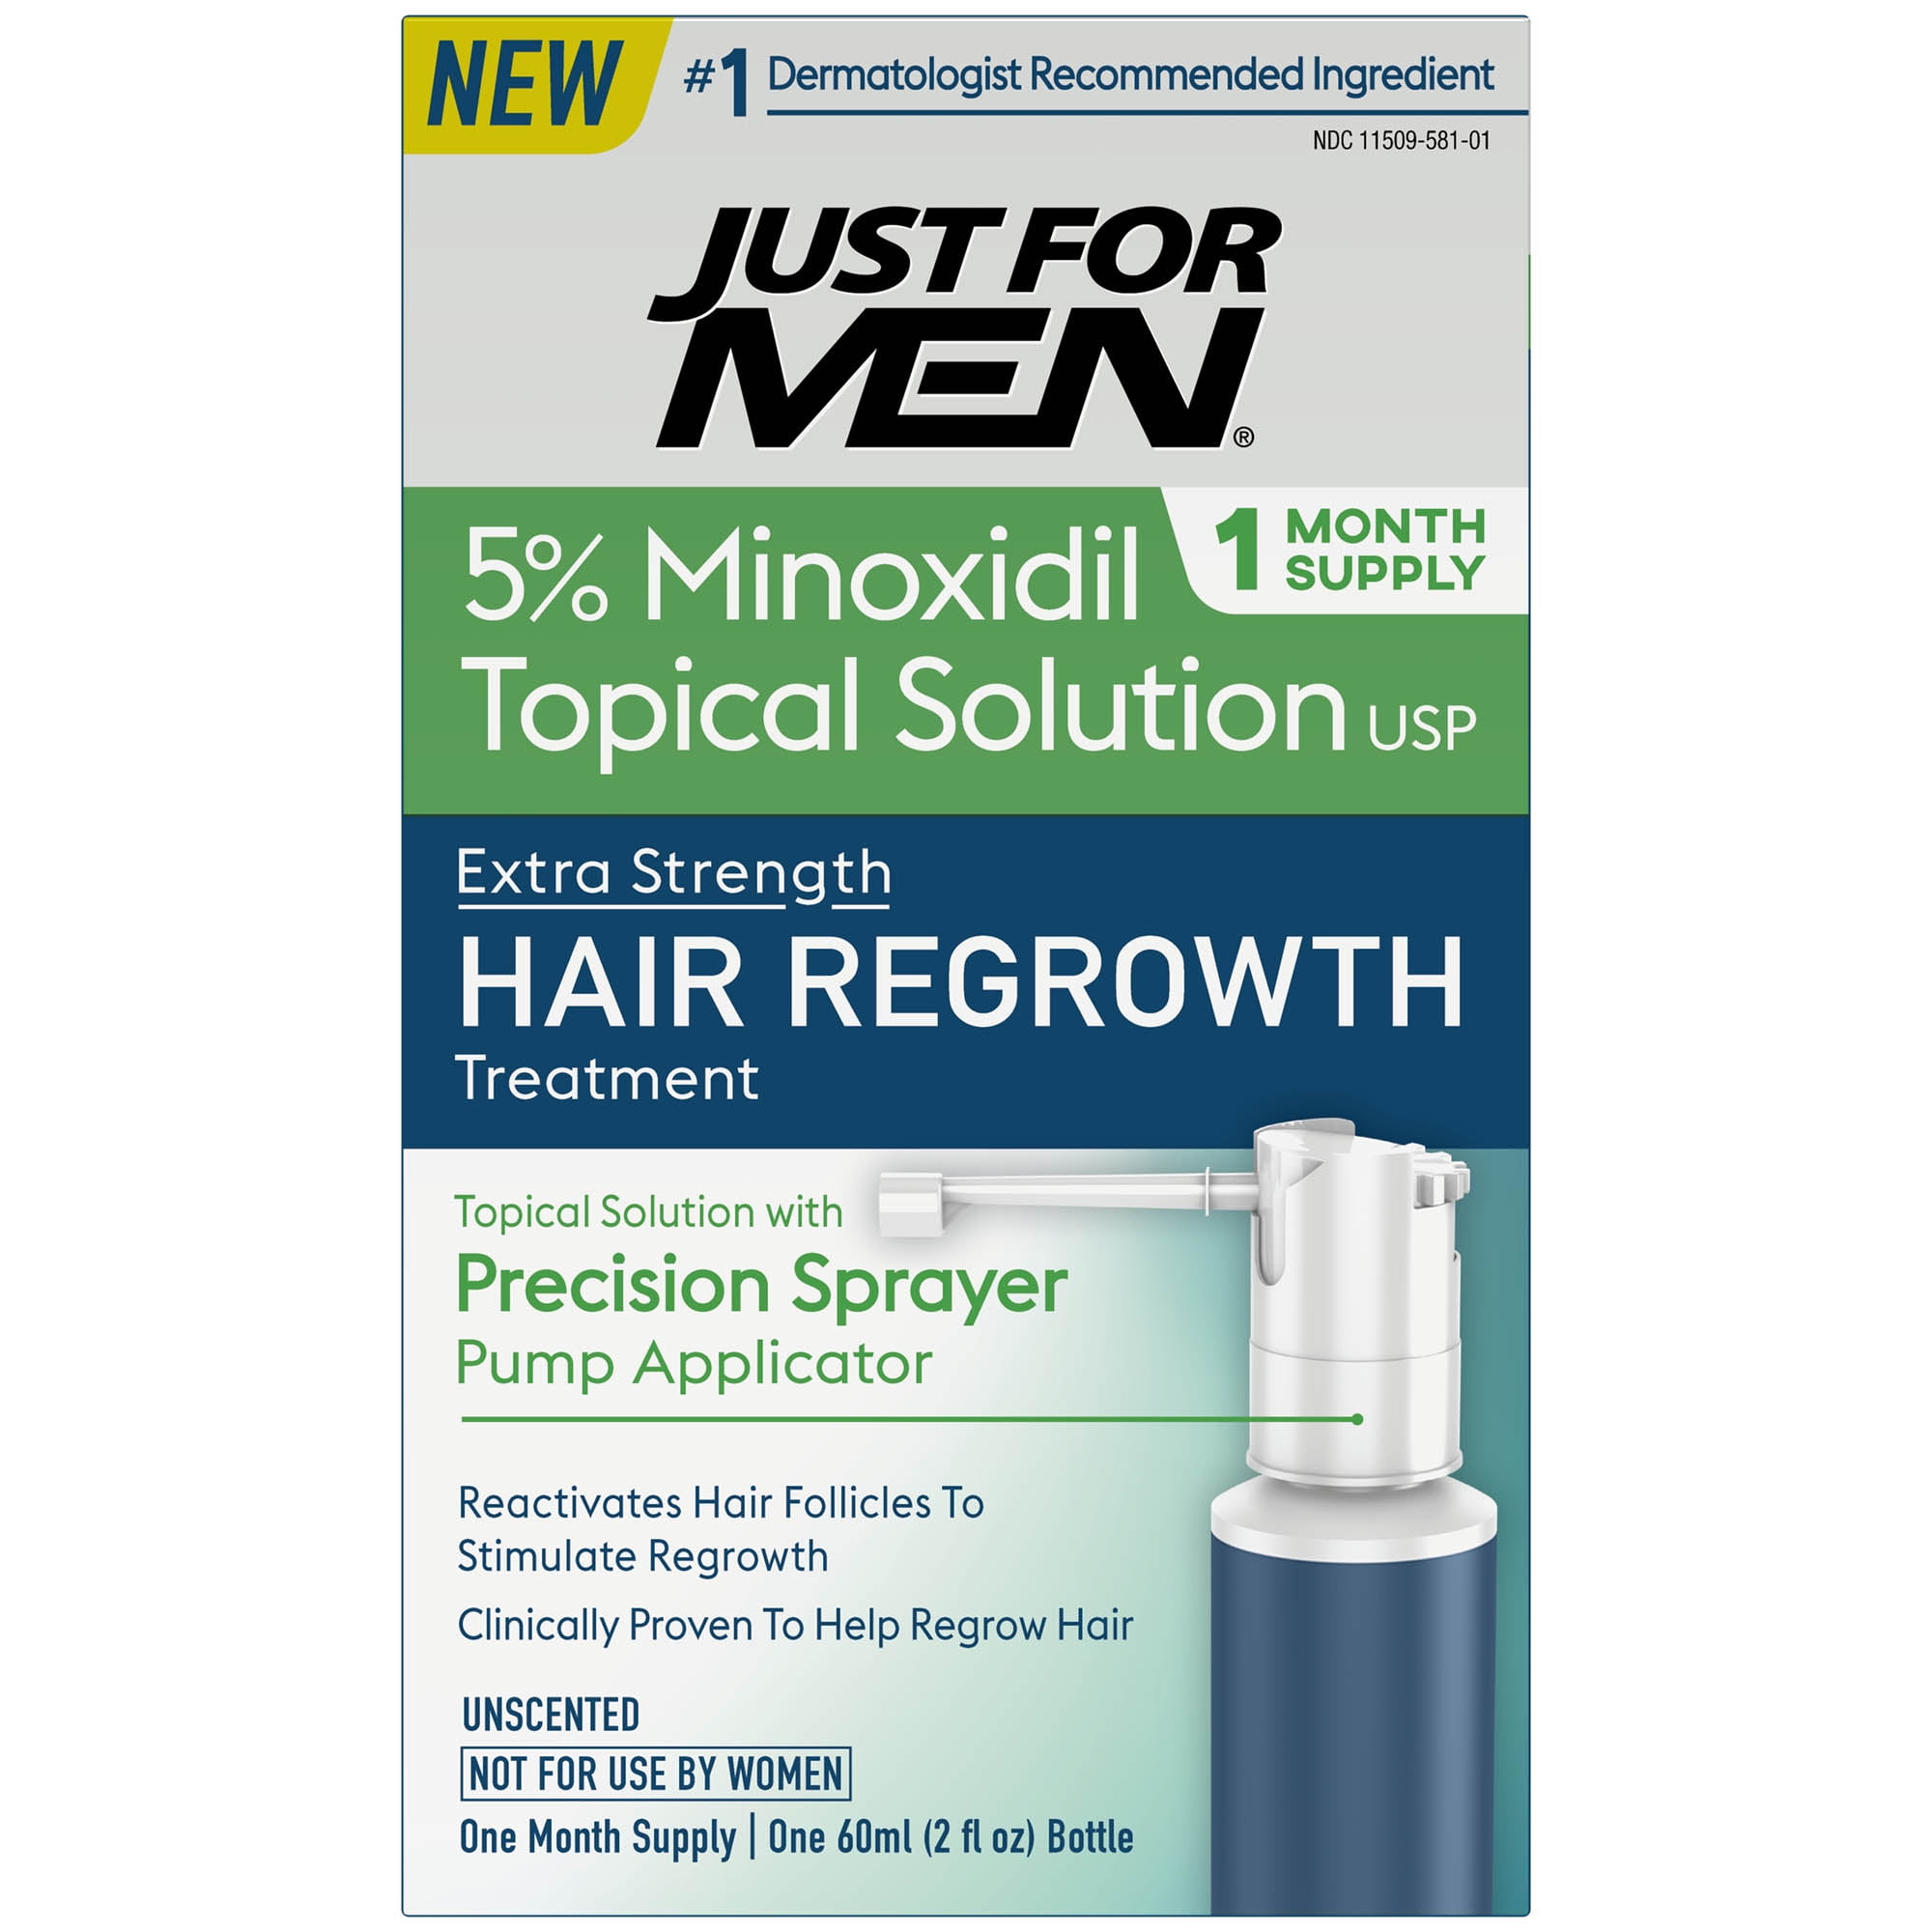 is minoxidil effective for hair regrowth